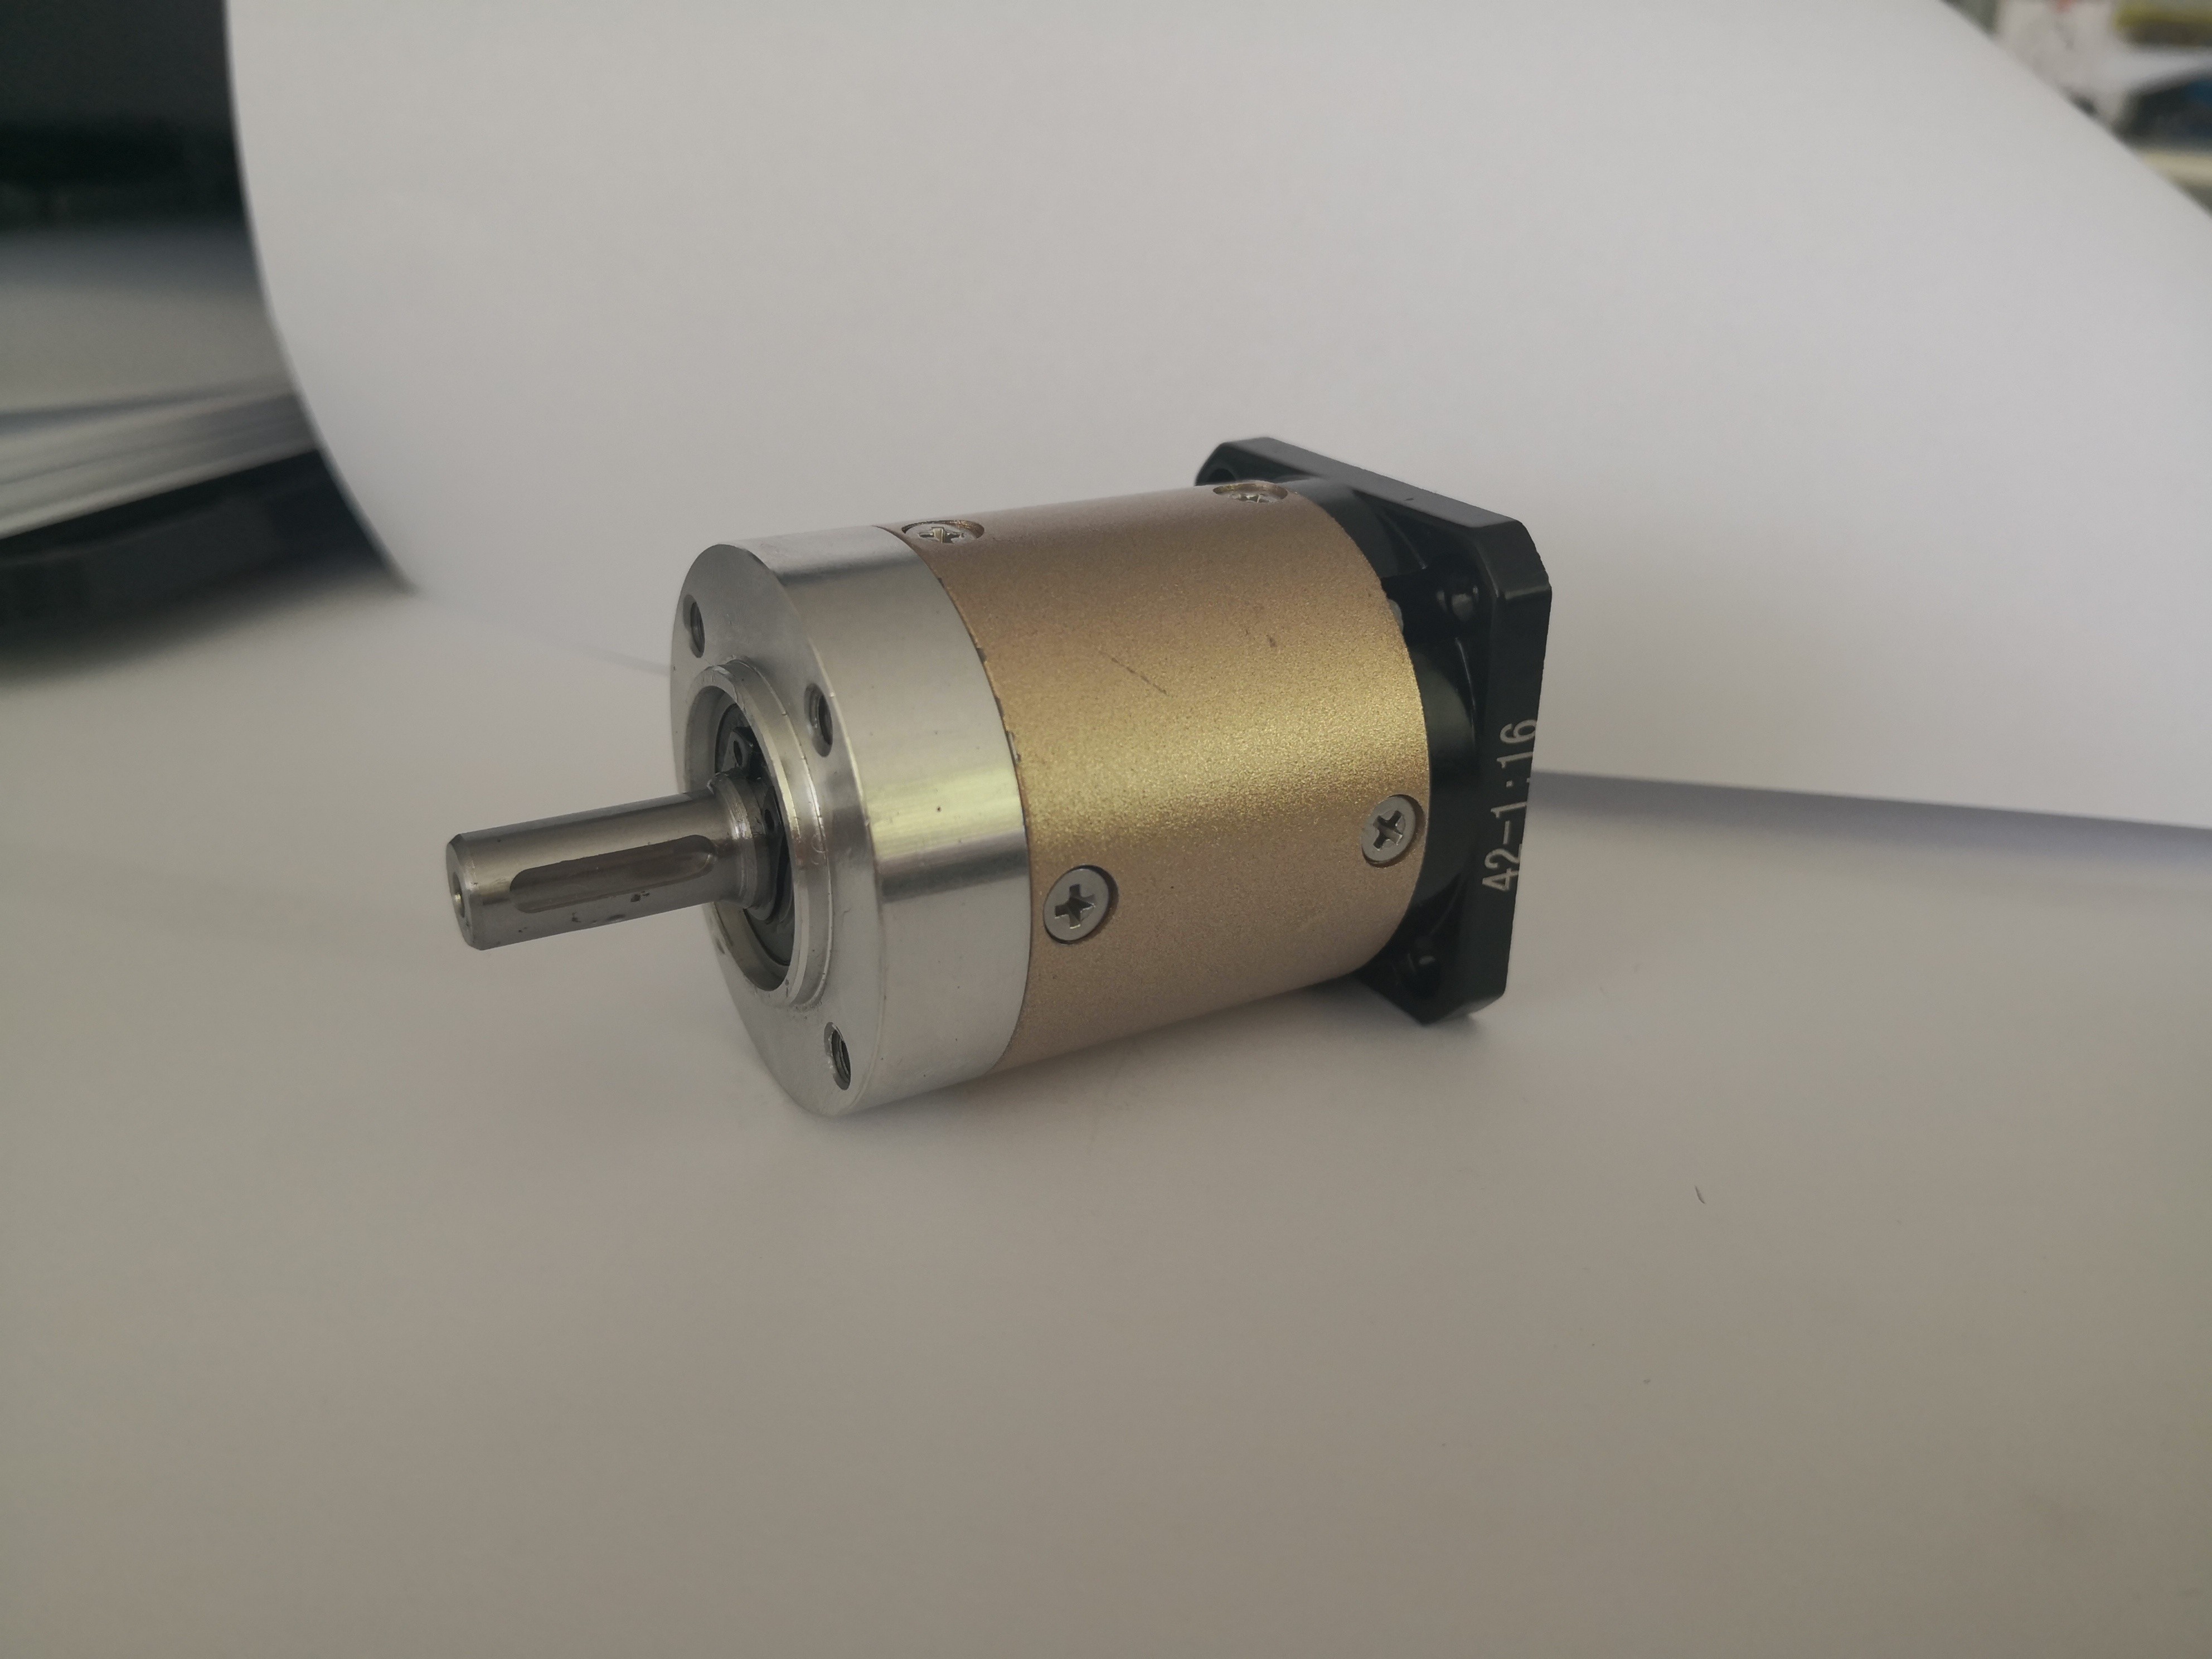 Precise Two Stage Gear Ratio 50:1 Nema 17 Brushless Motor Geared Speed Reducer Planetary Gearbox